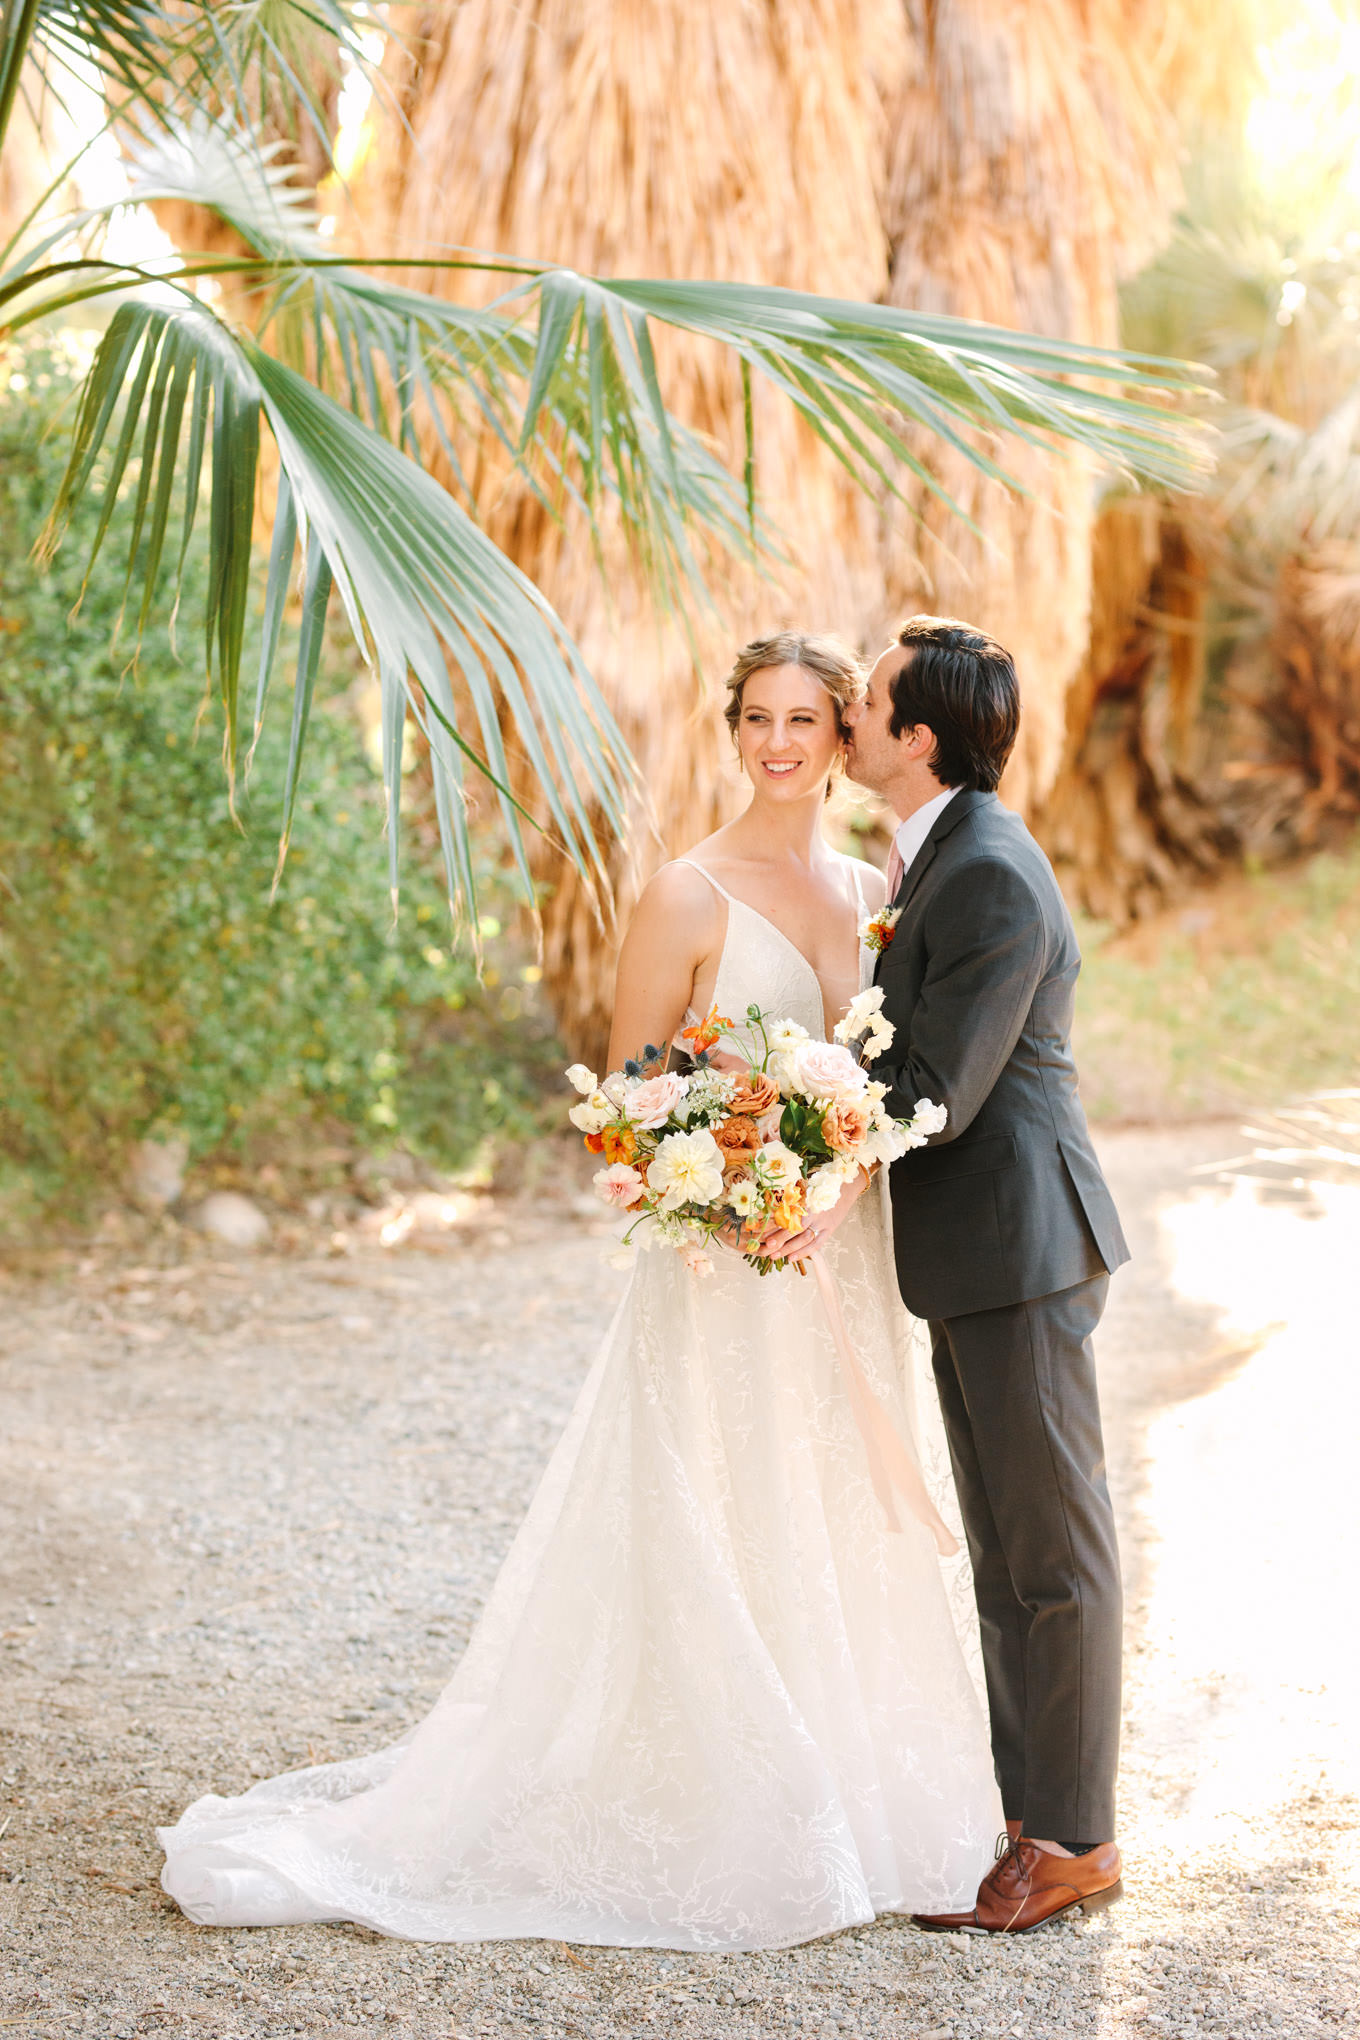 Bride and groom kissing in palm garden | Living Desert Zoo & Gardens wedding with unique details | Elevated and colorful wedding photography for fun-loving couples in Southern California |  #PalmSprings #palmspringsphotographer #gardenwedding #palmspringswedding  Source: Mary Costa Photography | Los Angeles wedding photographer 